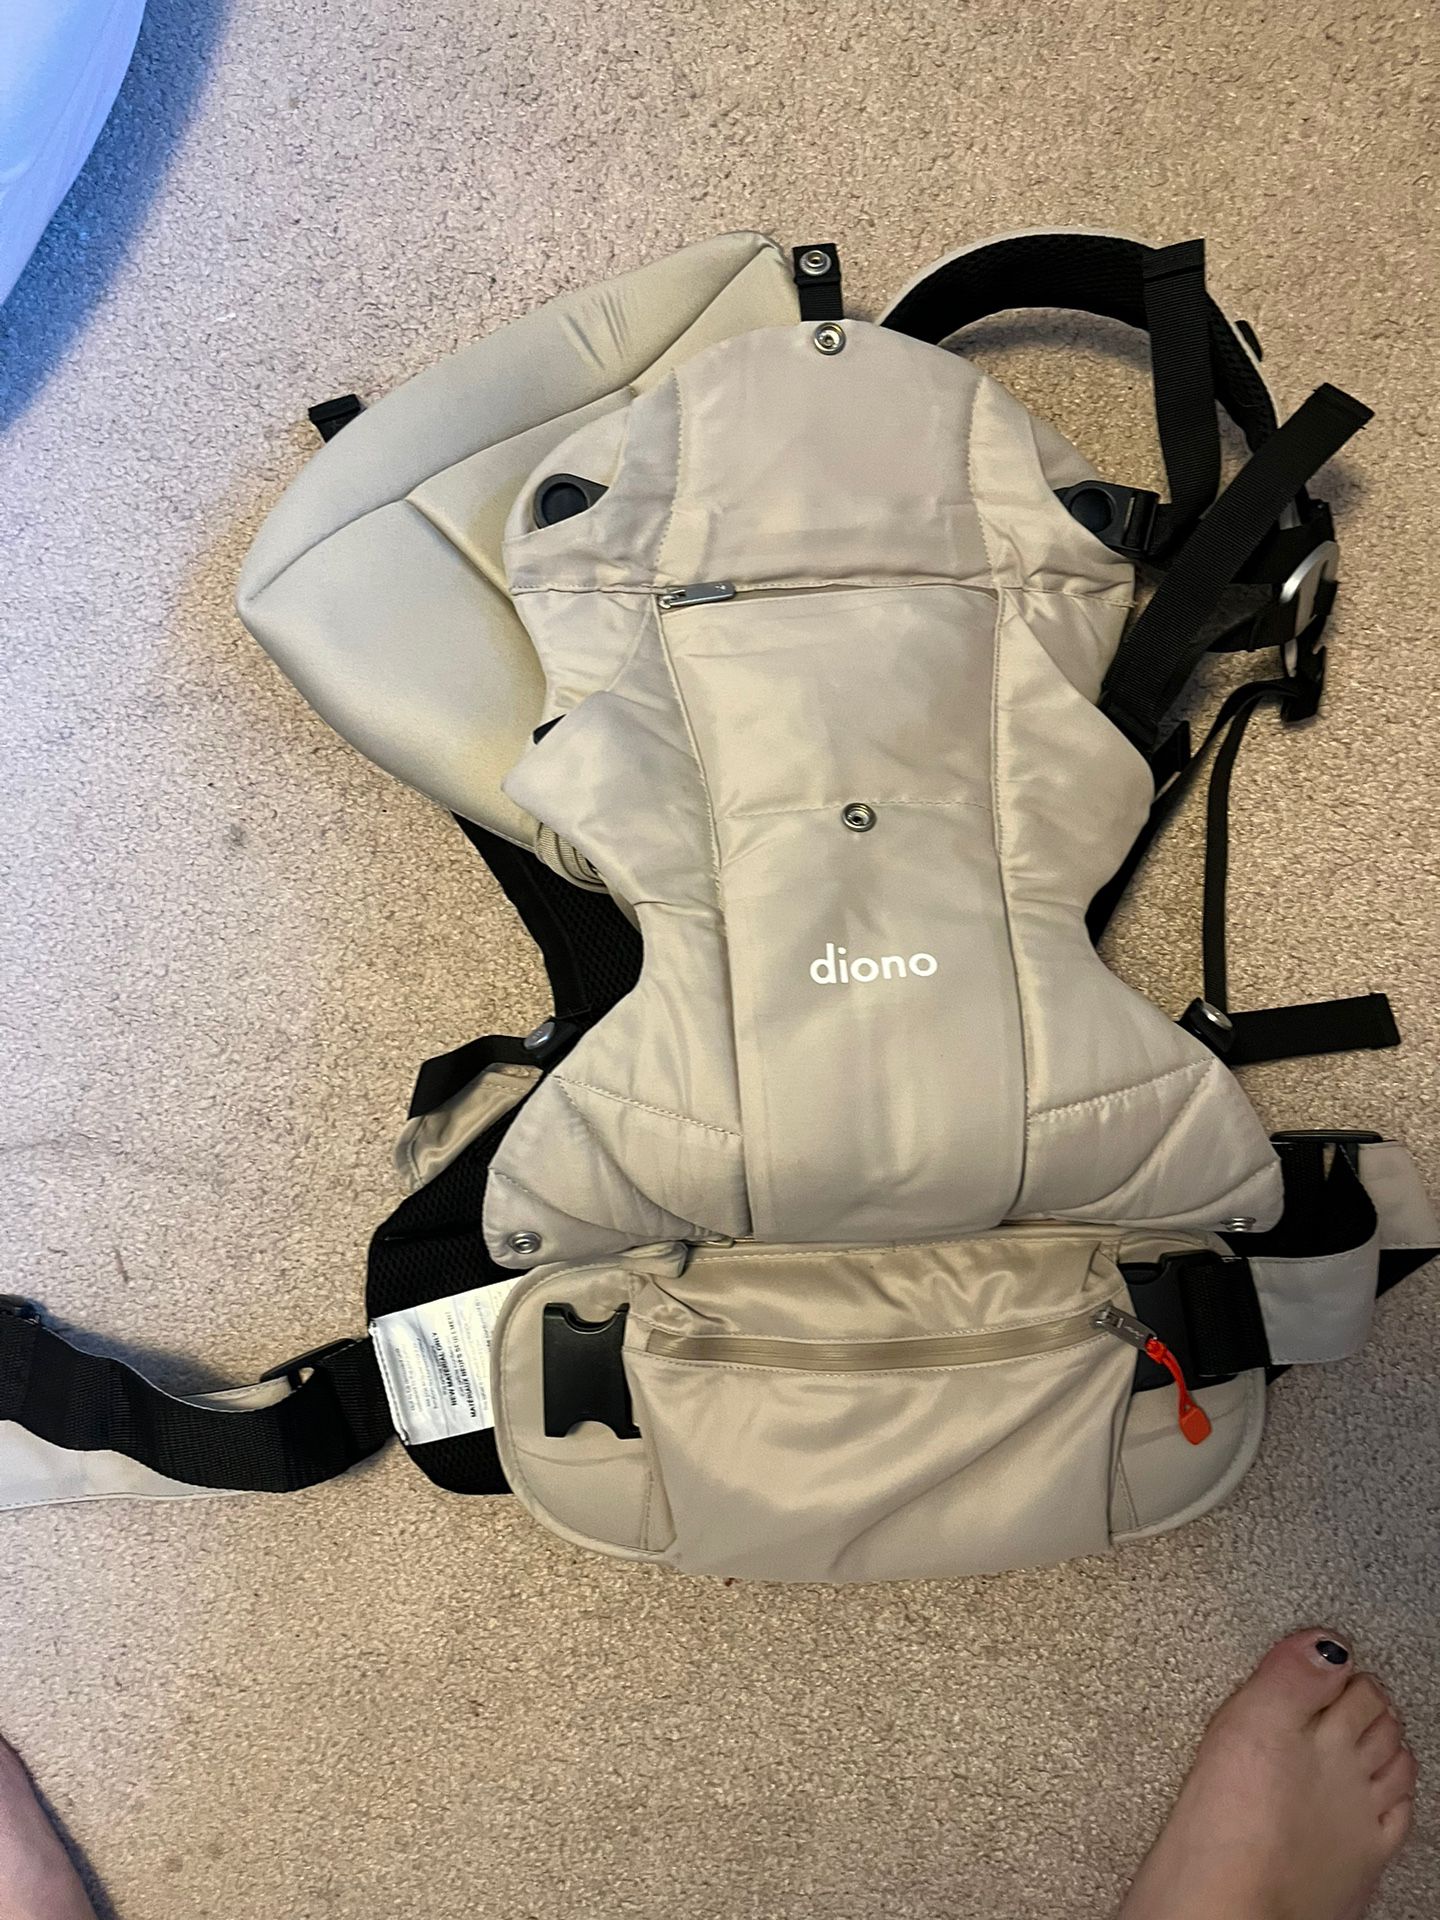 Diono Baby Carrier $40 OBO